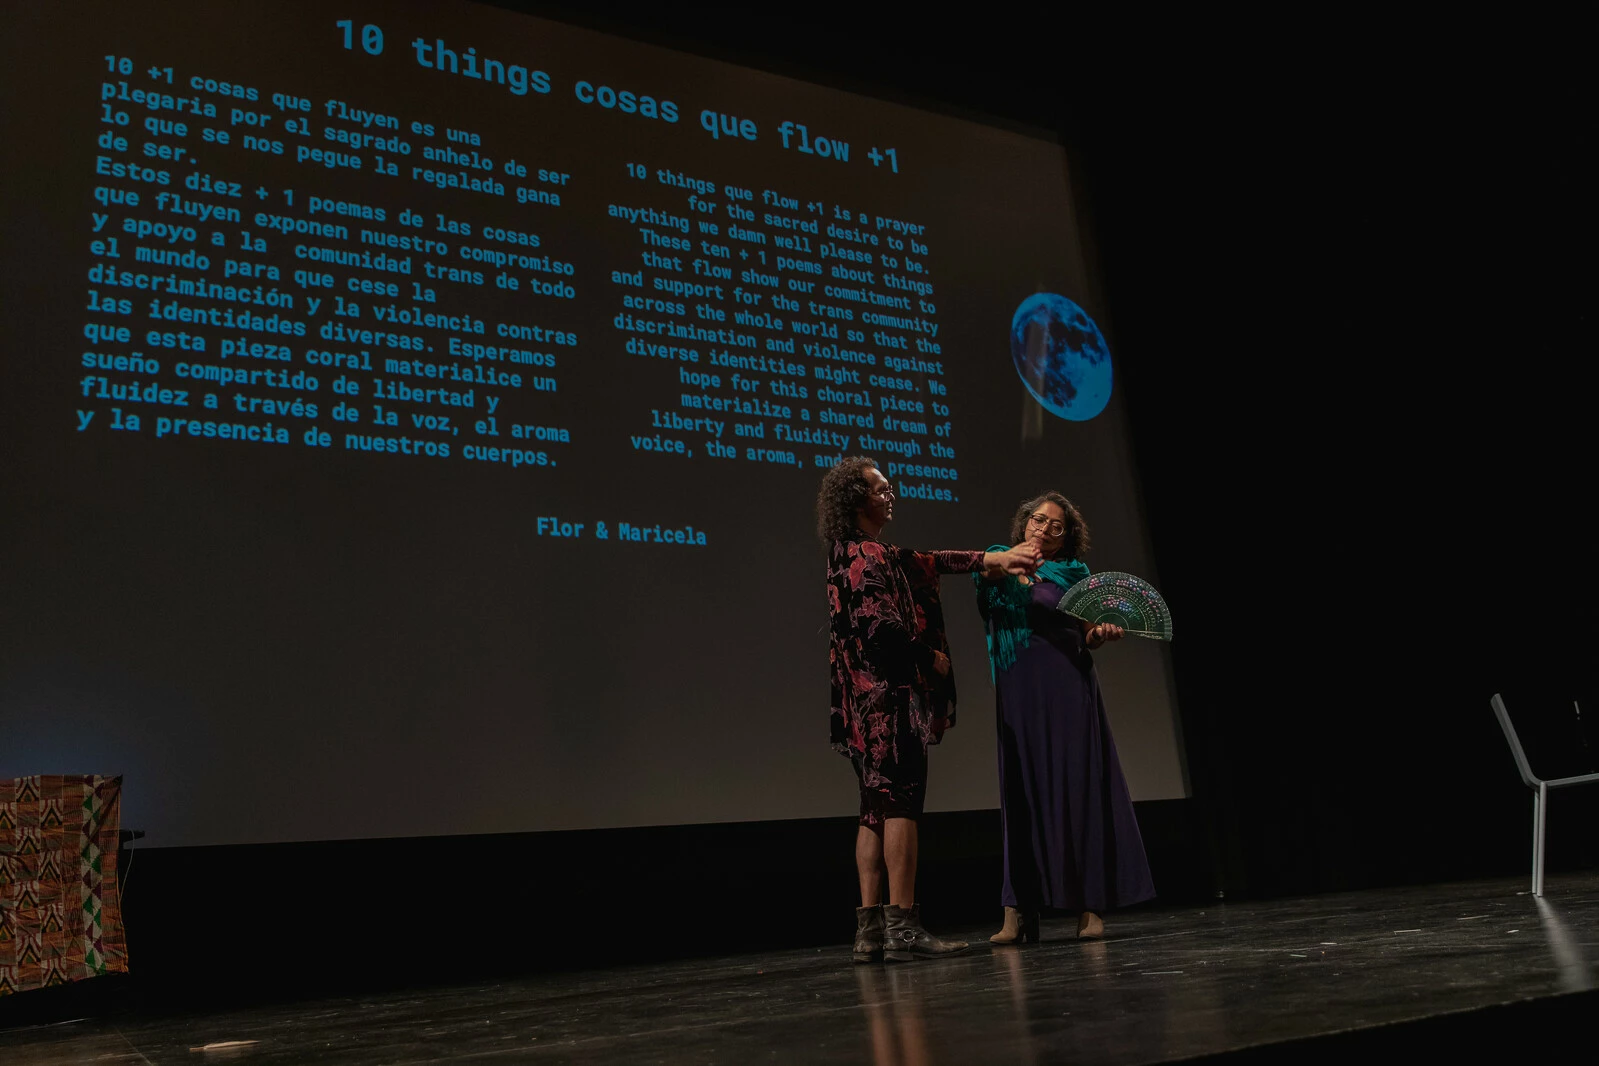 Two people interact with each other on stage in front of a screen displaying a lot of text